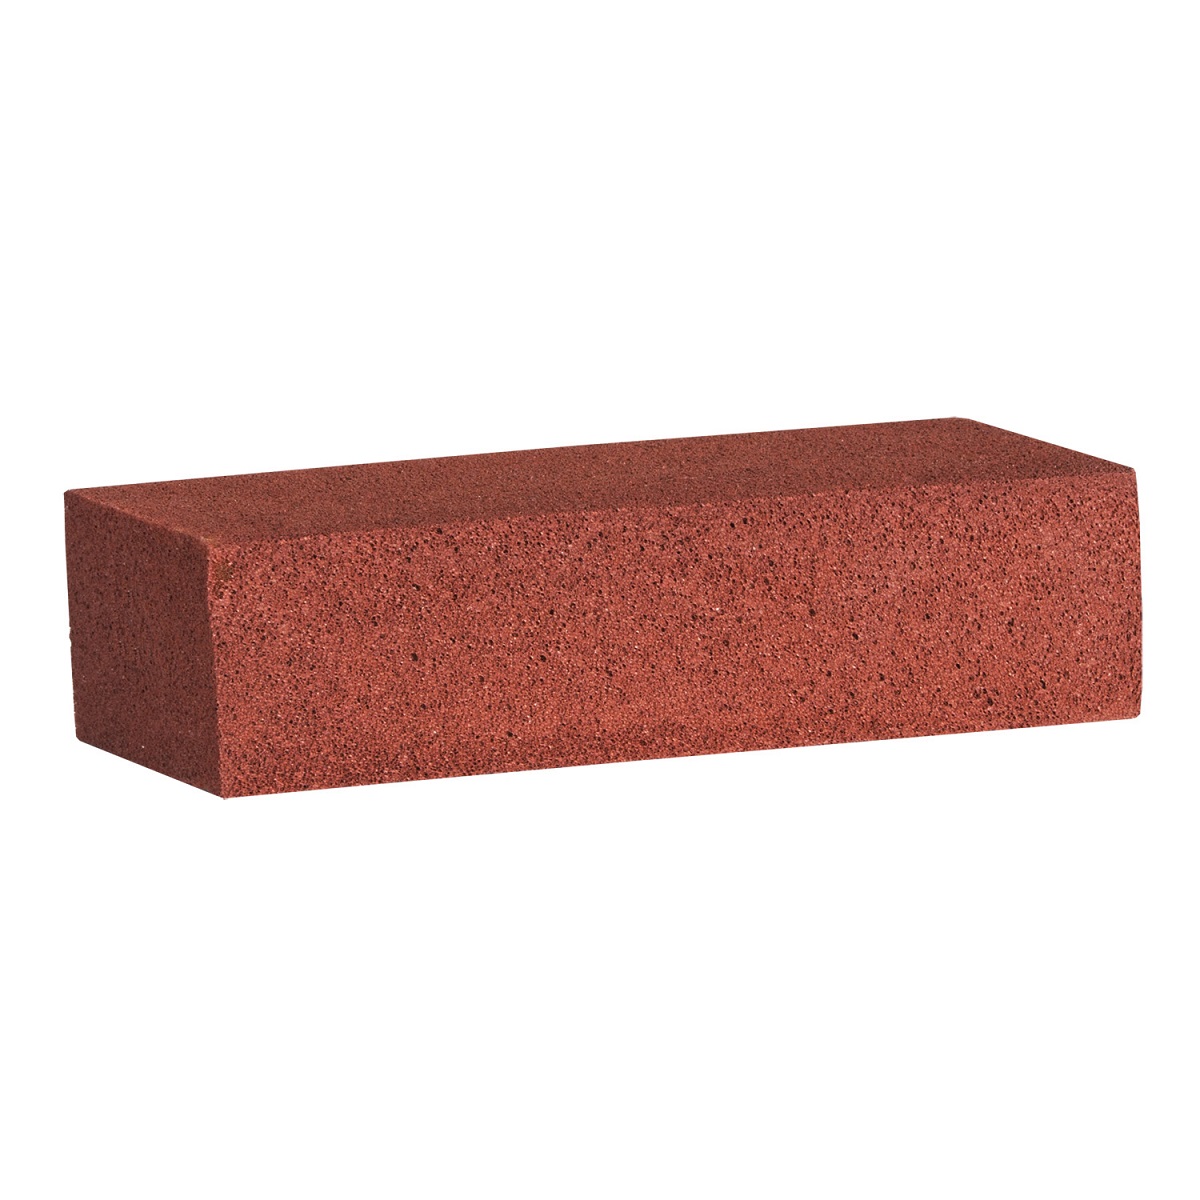 Party Central Club Pack of 12 Brown University Football Novelty Bad Call Foam Brick  7.5"